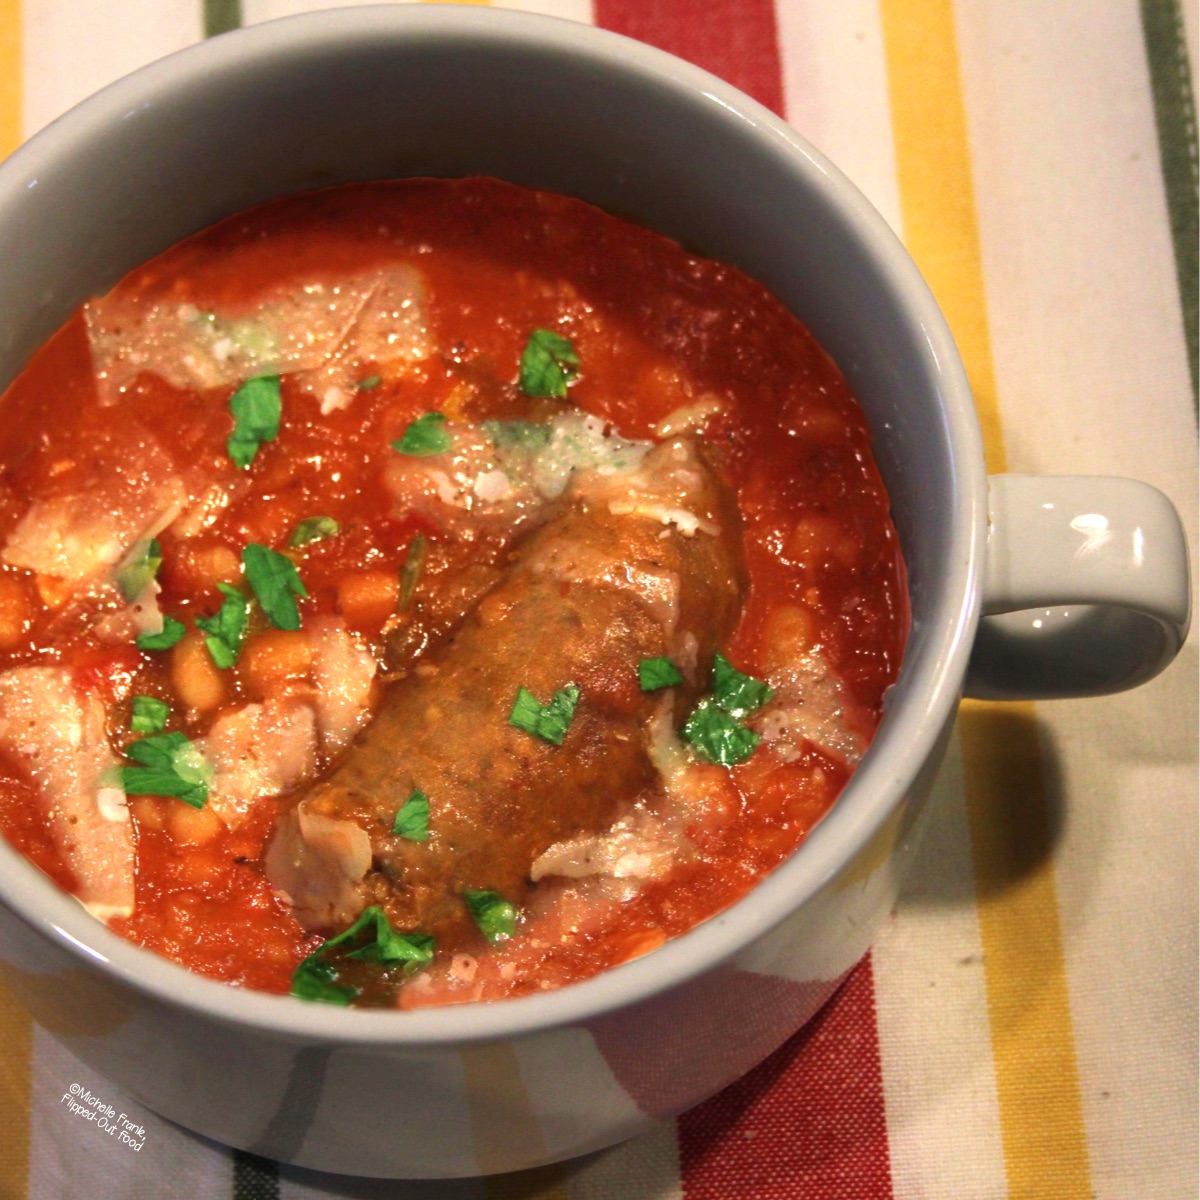 Italian Sausage and Beans (Salsiccie e Fagioli) in a white bowl with handles, garnished with chopped parsley.